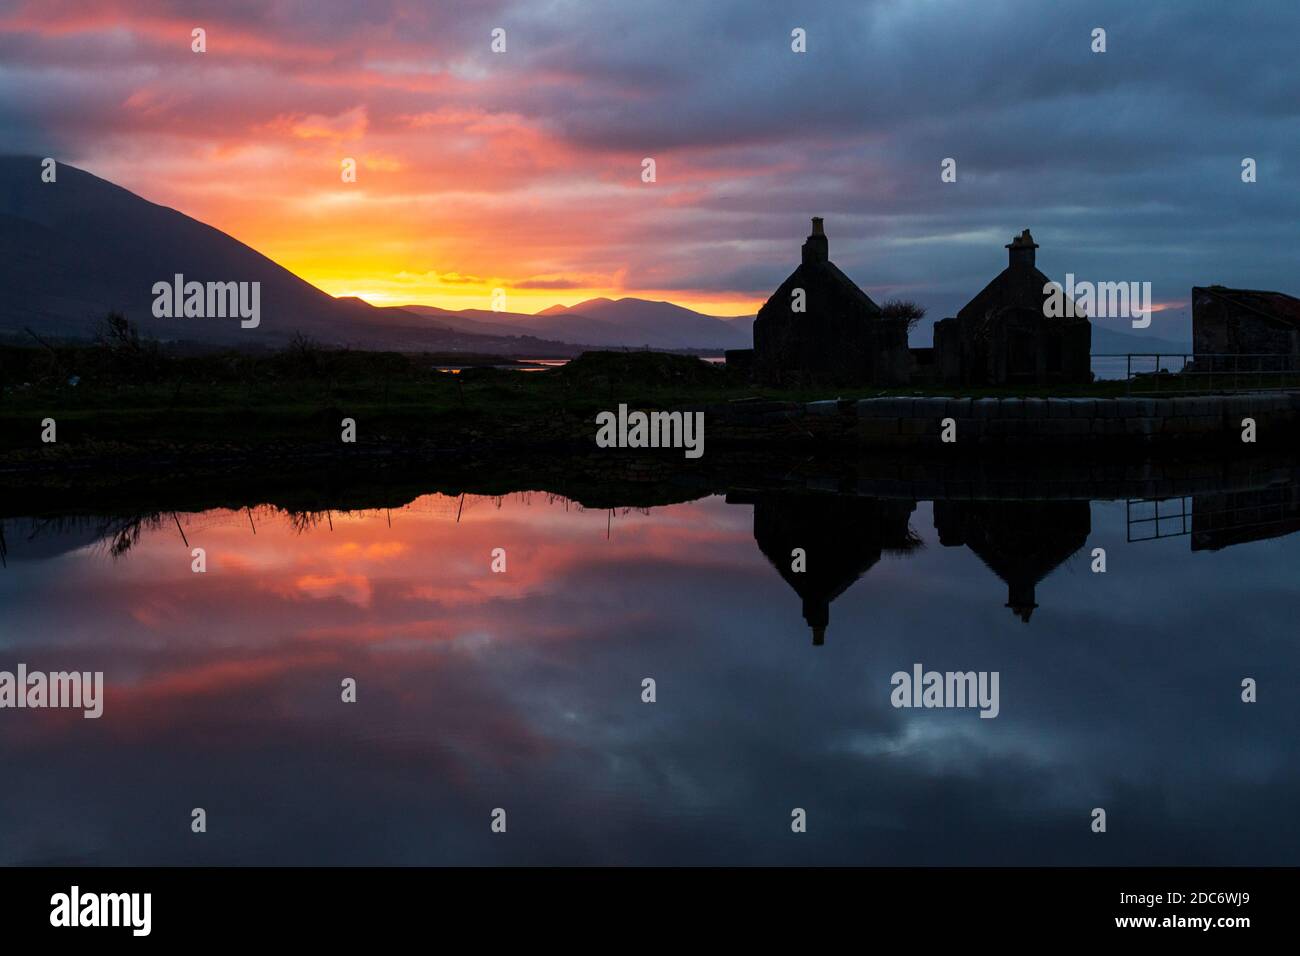 Reflection of Silhouette of Ruined Cottage and Sky at Sunset in Calm Canal Water in Tralee, Ireland Stock Photo